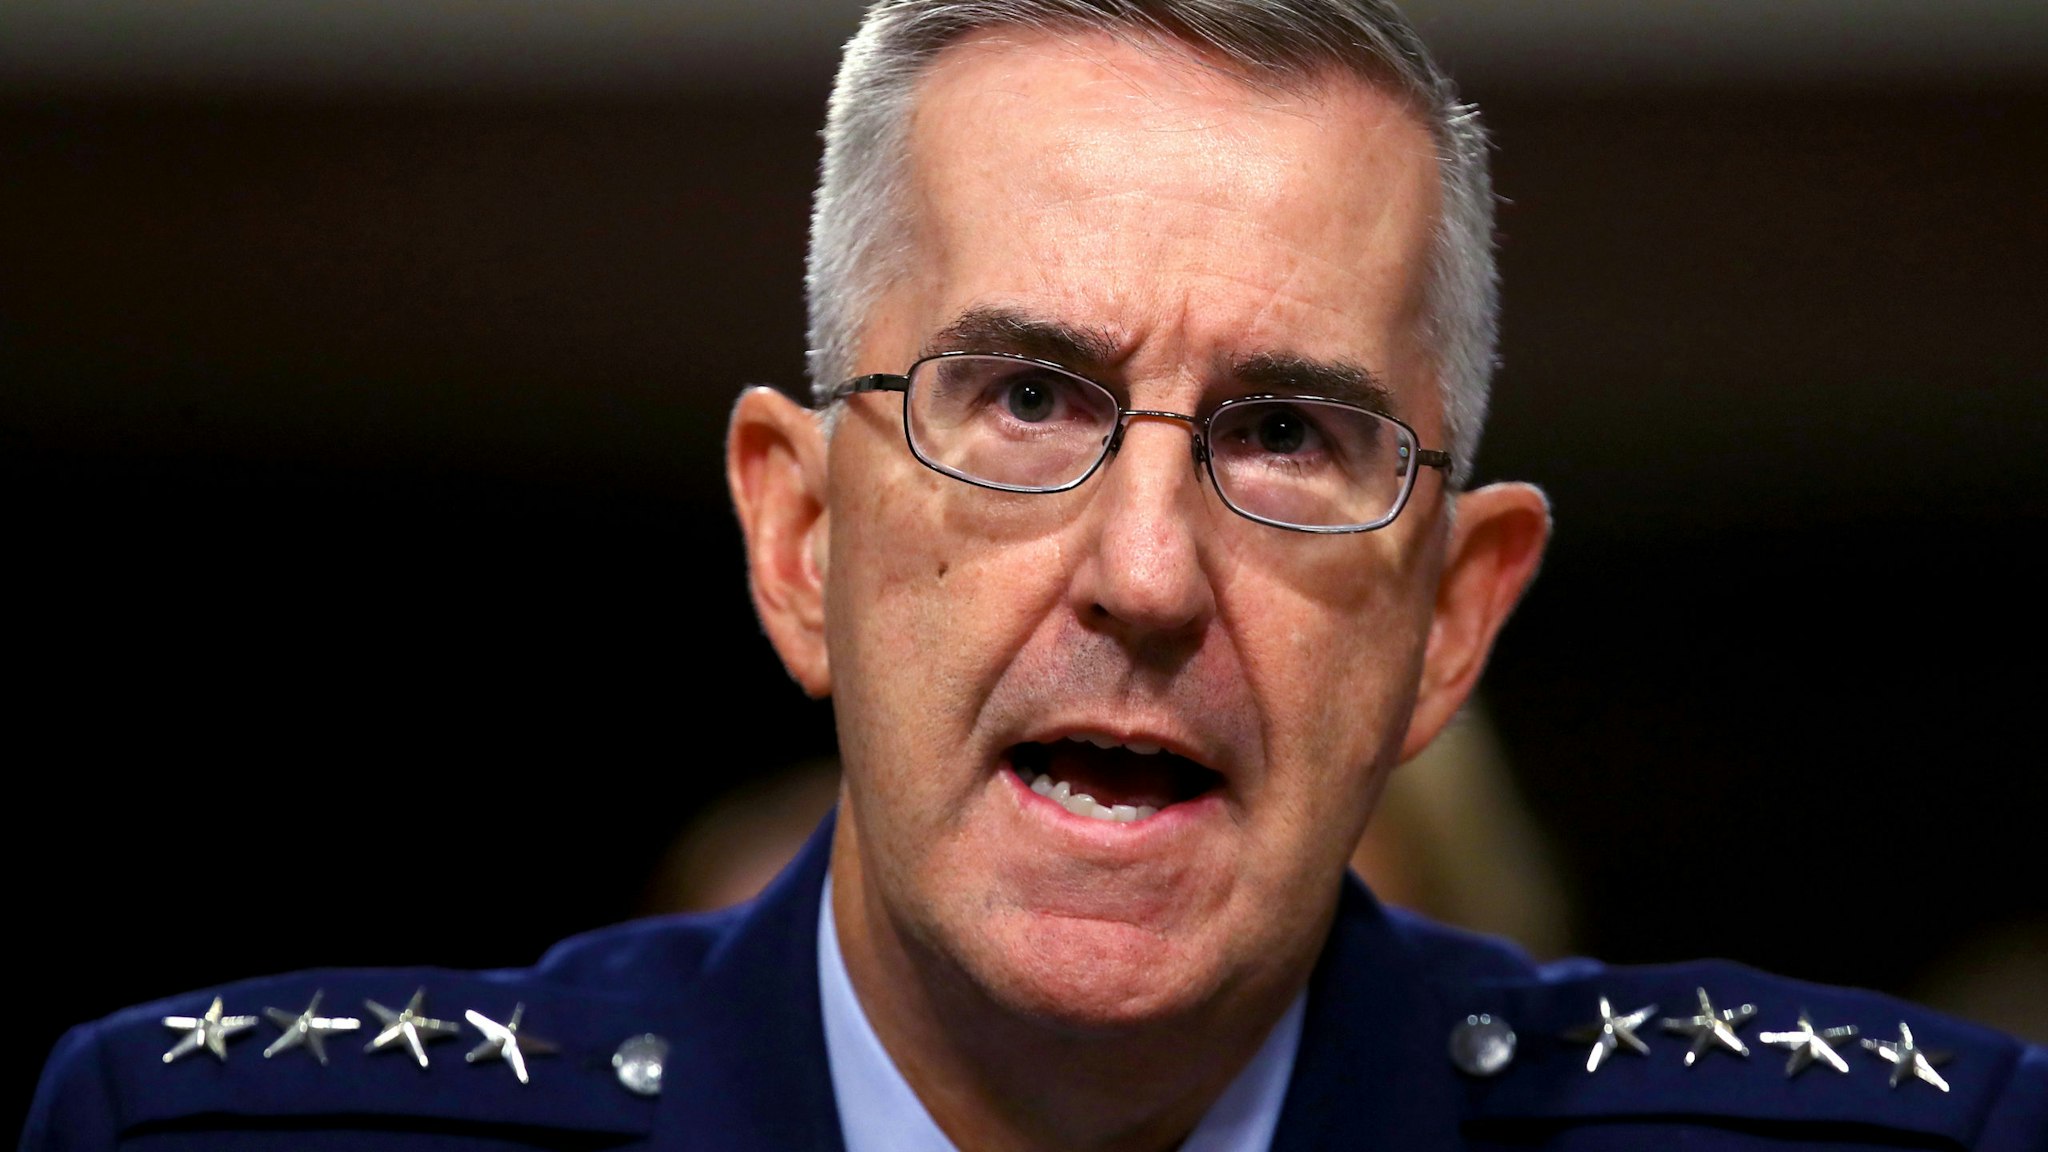 WASHINGTON, DC - JULY 30: U.S. Air Force Gen. John E. Hyten testifies before the Senate Armed Services Committee on his appointment as the next Vice Chairman Of The Joint Chiefs Of Staff July 30, 2019 in Washington, DC. During the hearing, Hyten was questioned on allegations of sexual assault from a former aide, Col. Kathryn Spletstoser, in a California hotel room in December 2017.